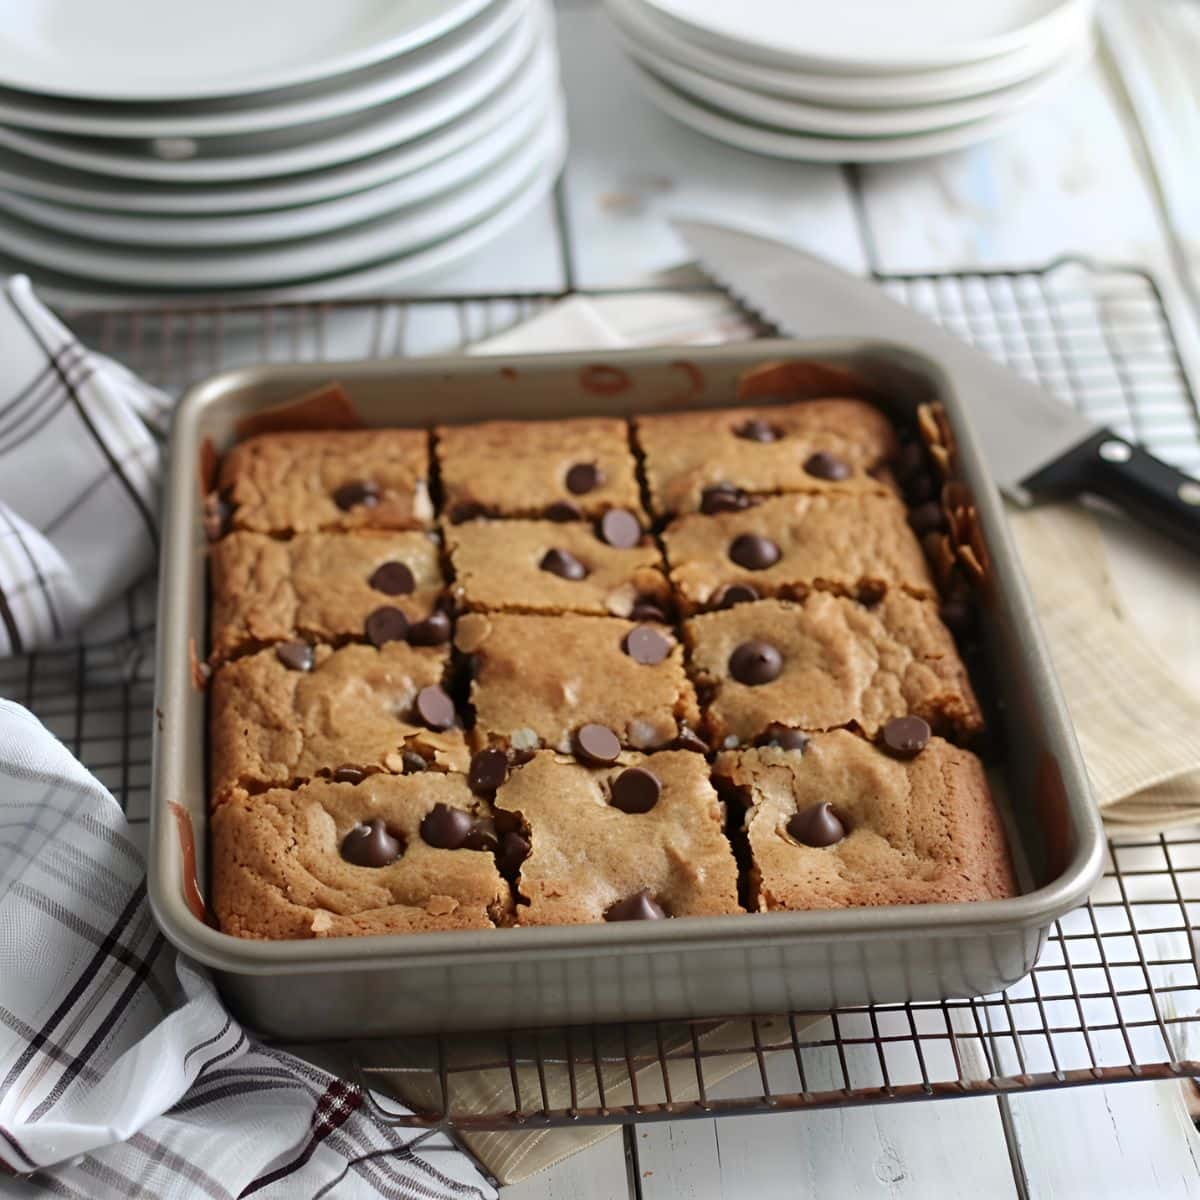 Chocolate Chip Blondies in the Baking Dish on a Wire Rack with a Knife and Plates for Serving in the Background